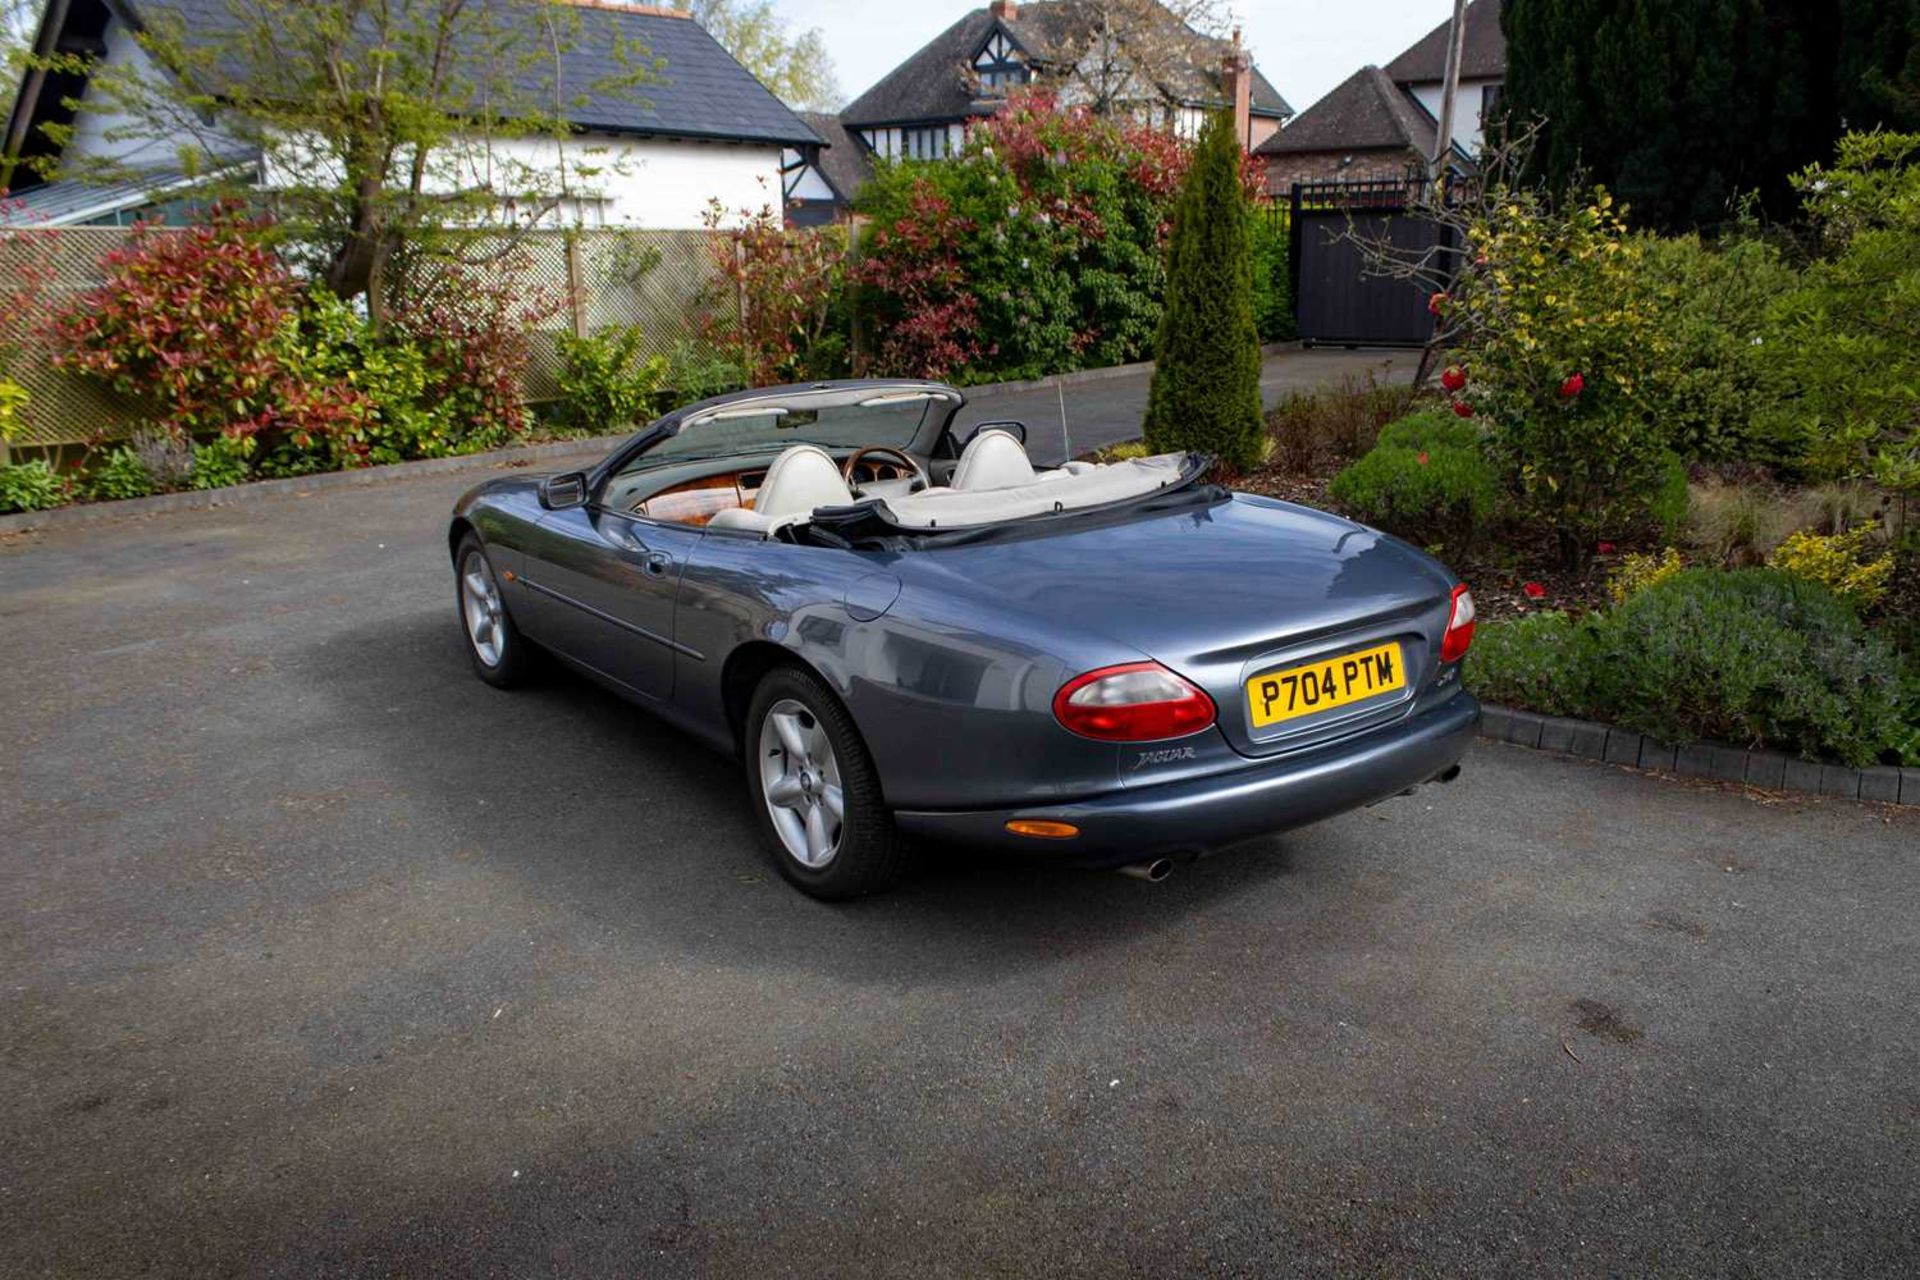 1997 Jaguar XK8 Convertible ***NO RESERVE*** Only one former keeper and full service history  - Image 12 of 89